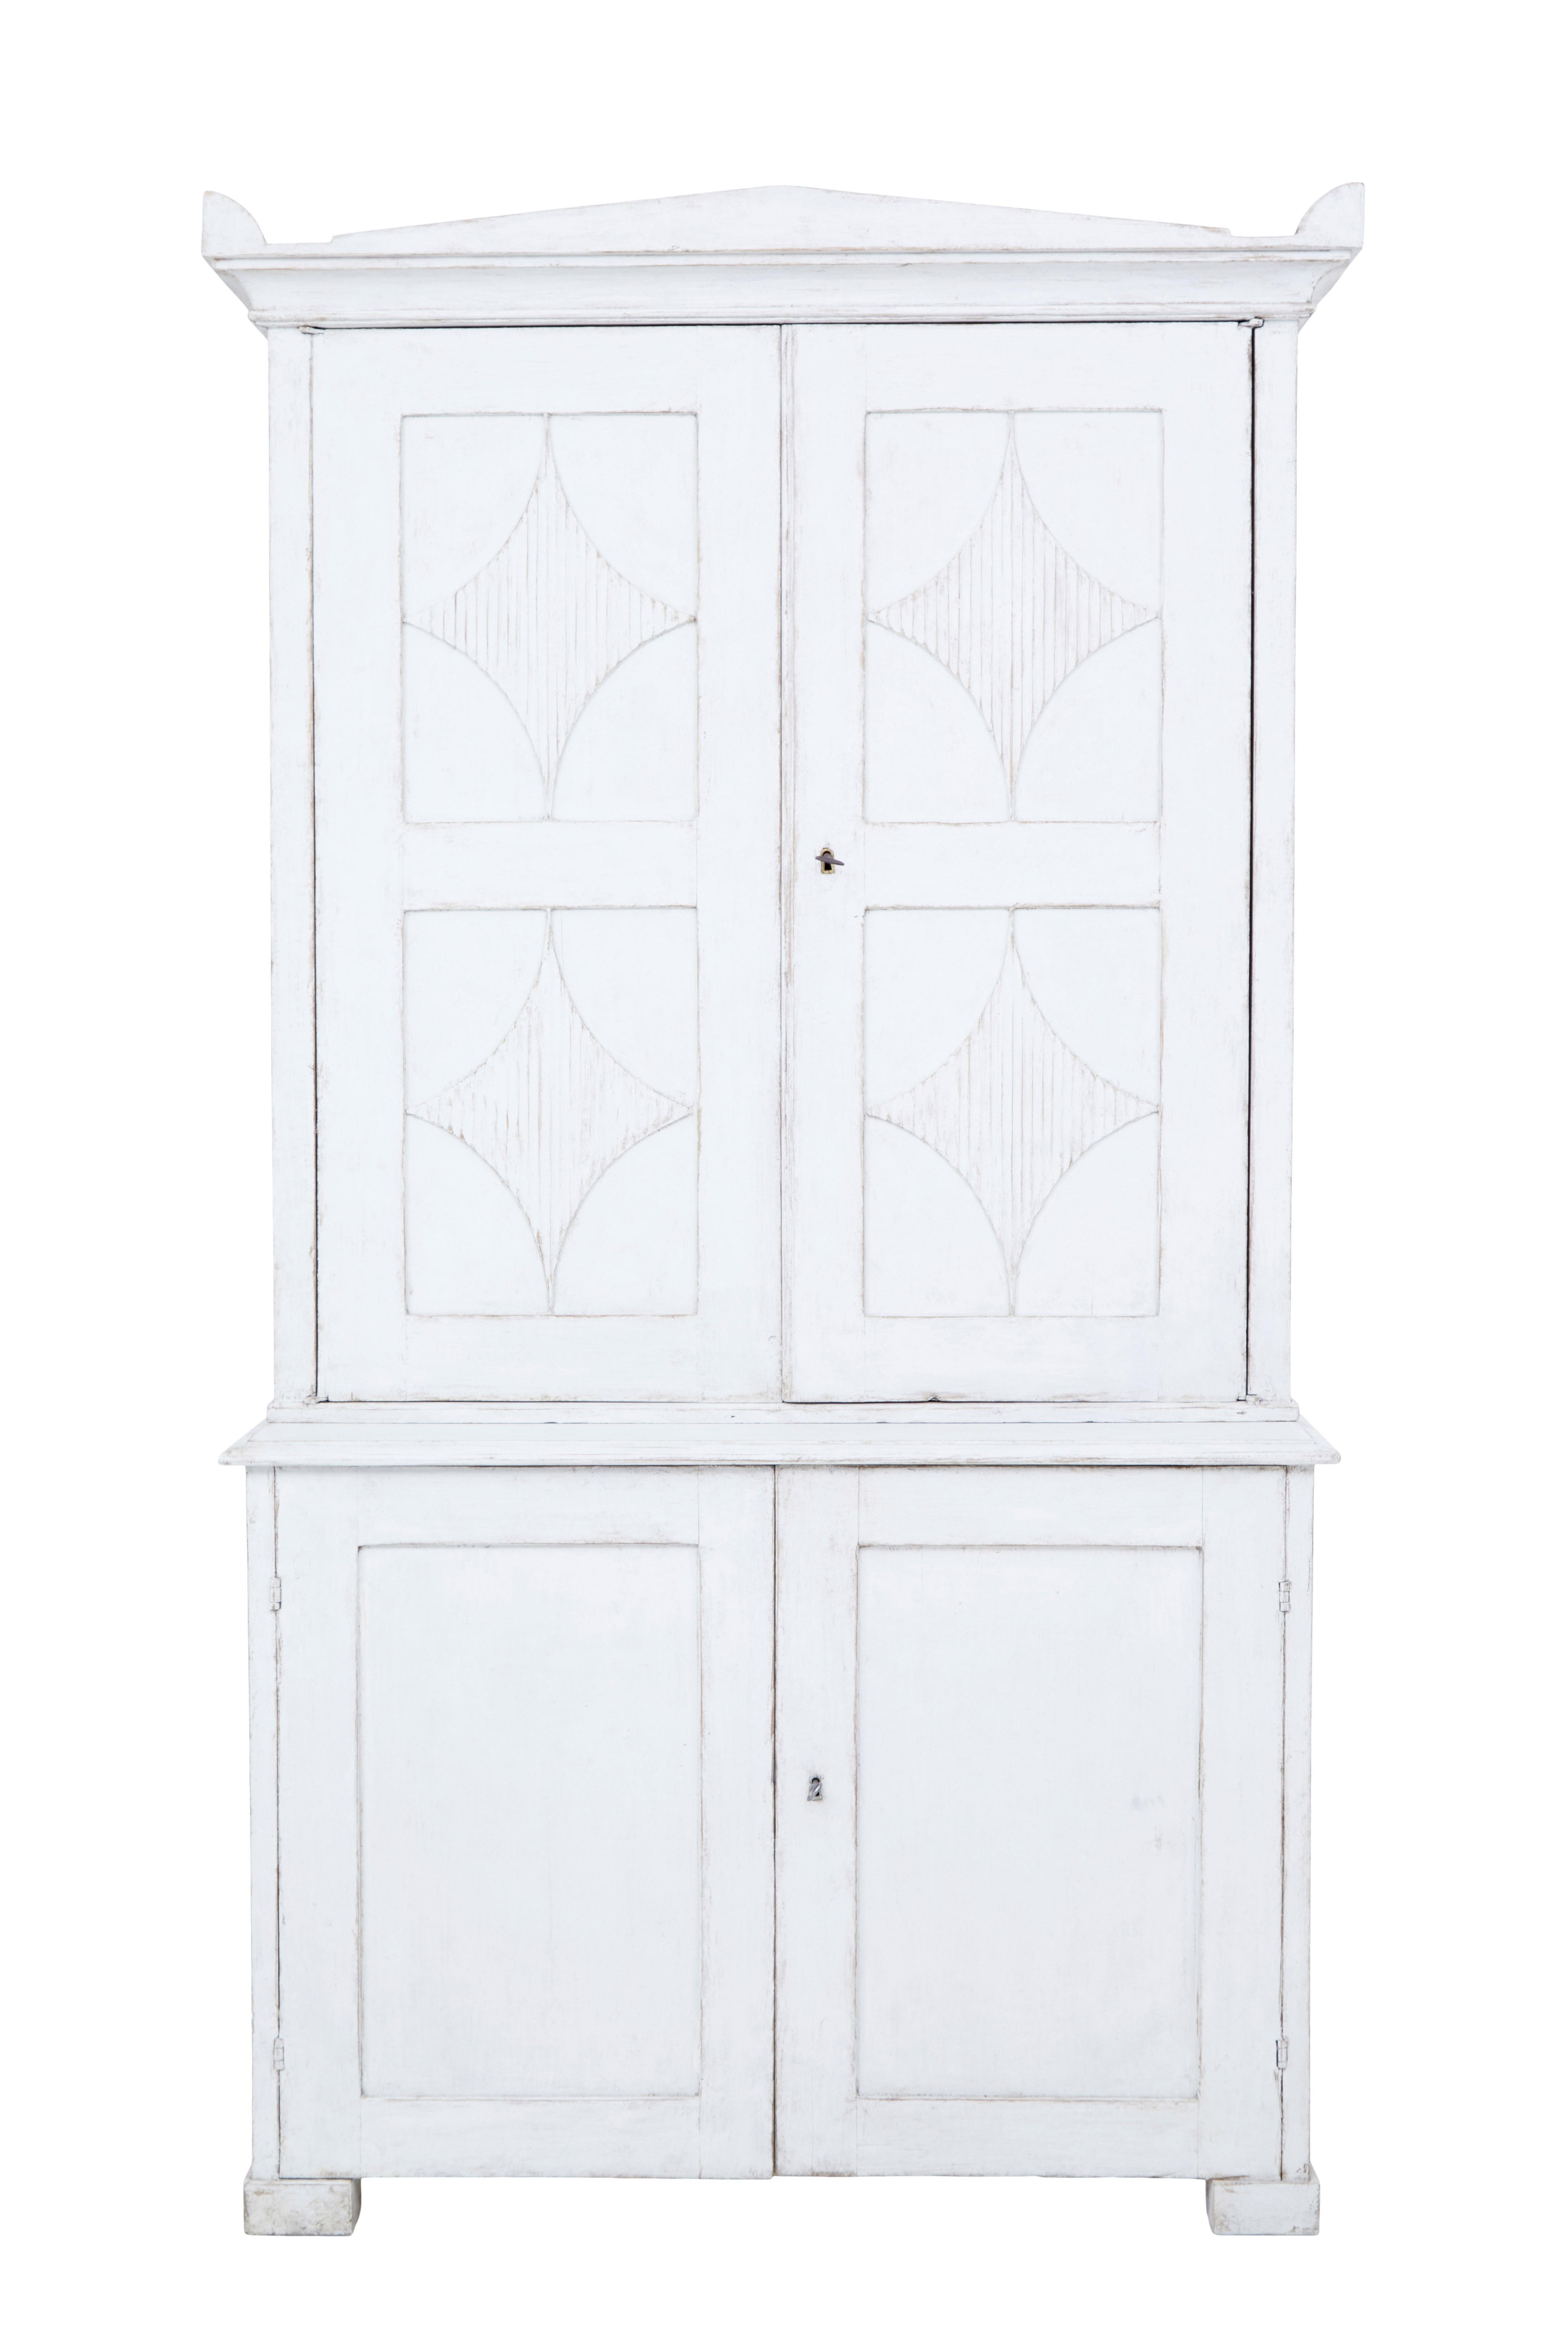 Swedish early 19th century painted cupboard circa 1820.

Fine quality 2 part cupboard, ideal for kitchen or multiple rooms around the house. Top section with architectural cornice, decorated with fluted recessed panels to the doors. Opening on the